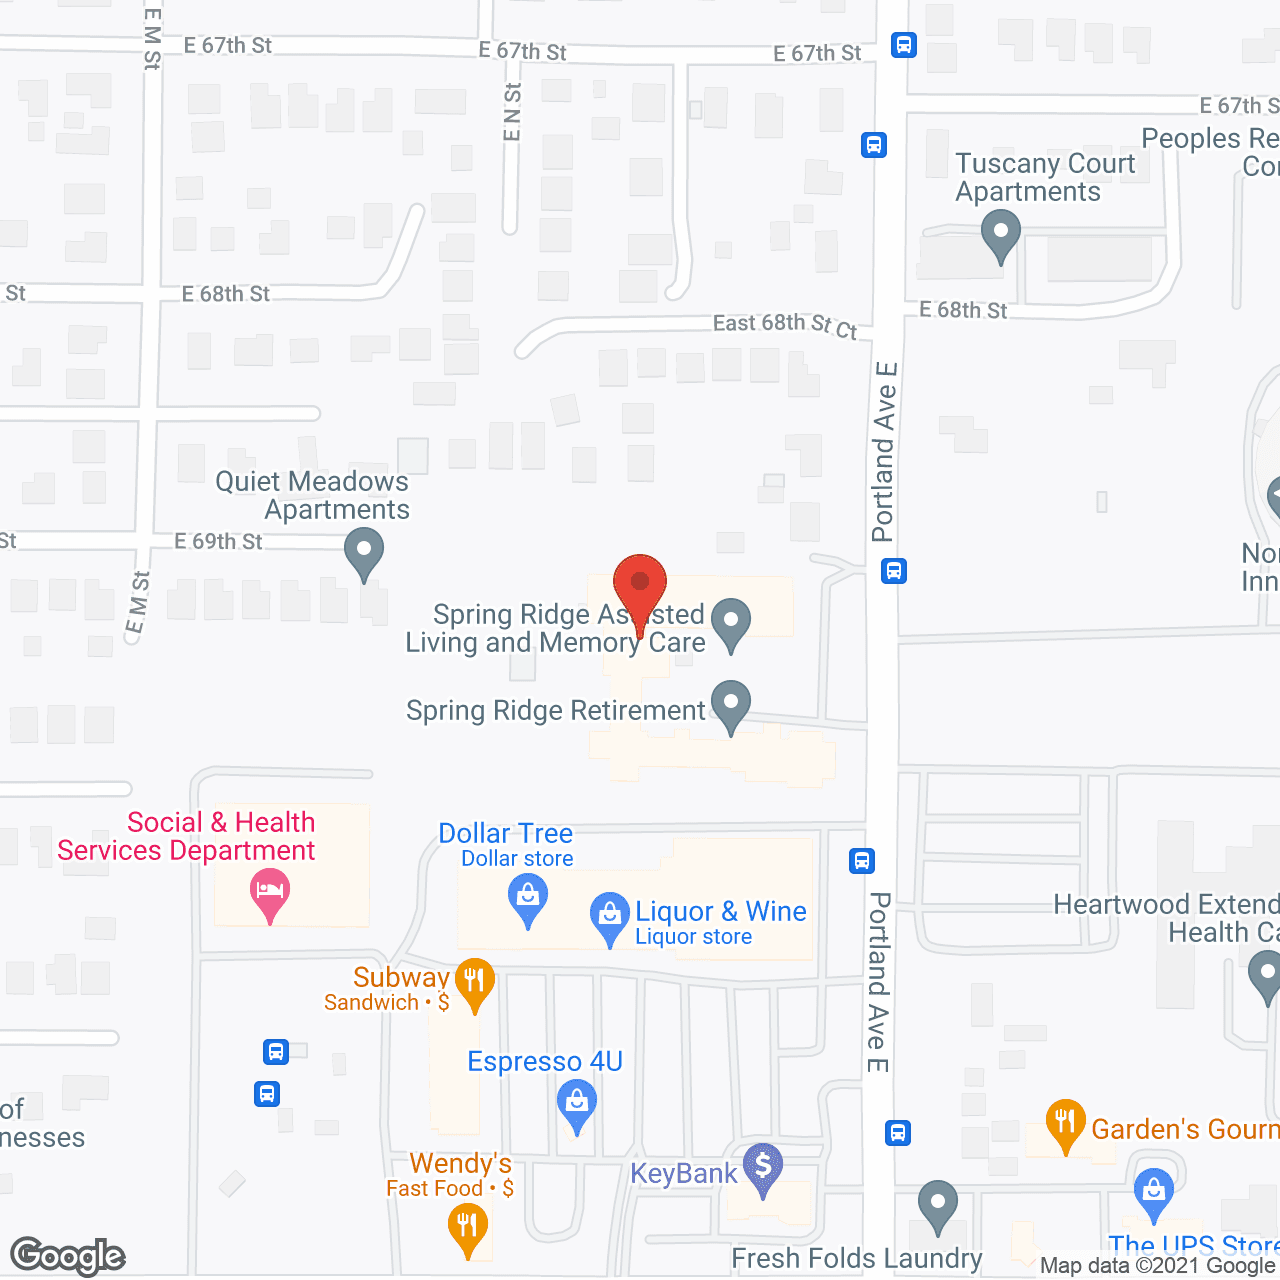 Spring Ridge Assisted Living and Memory Care in google map